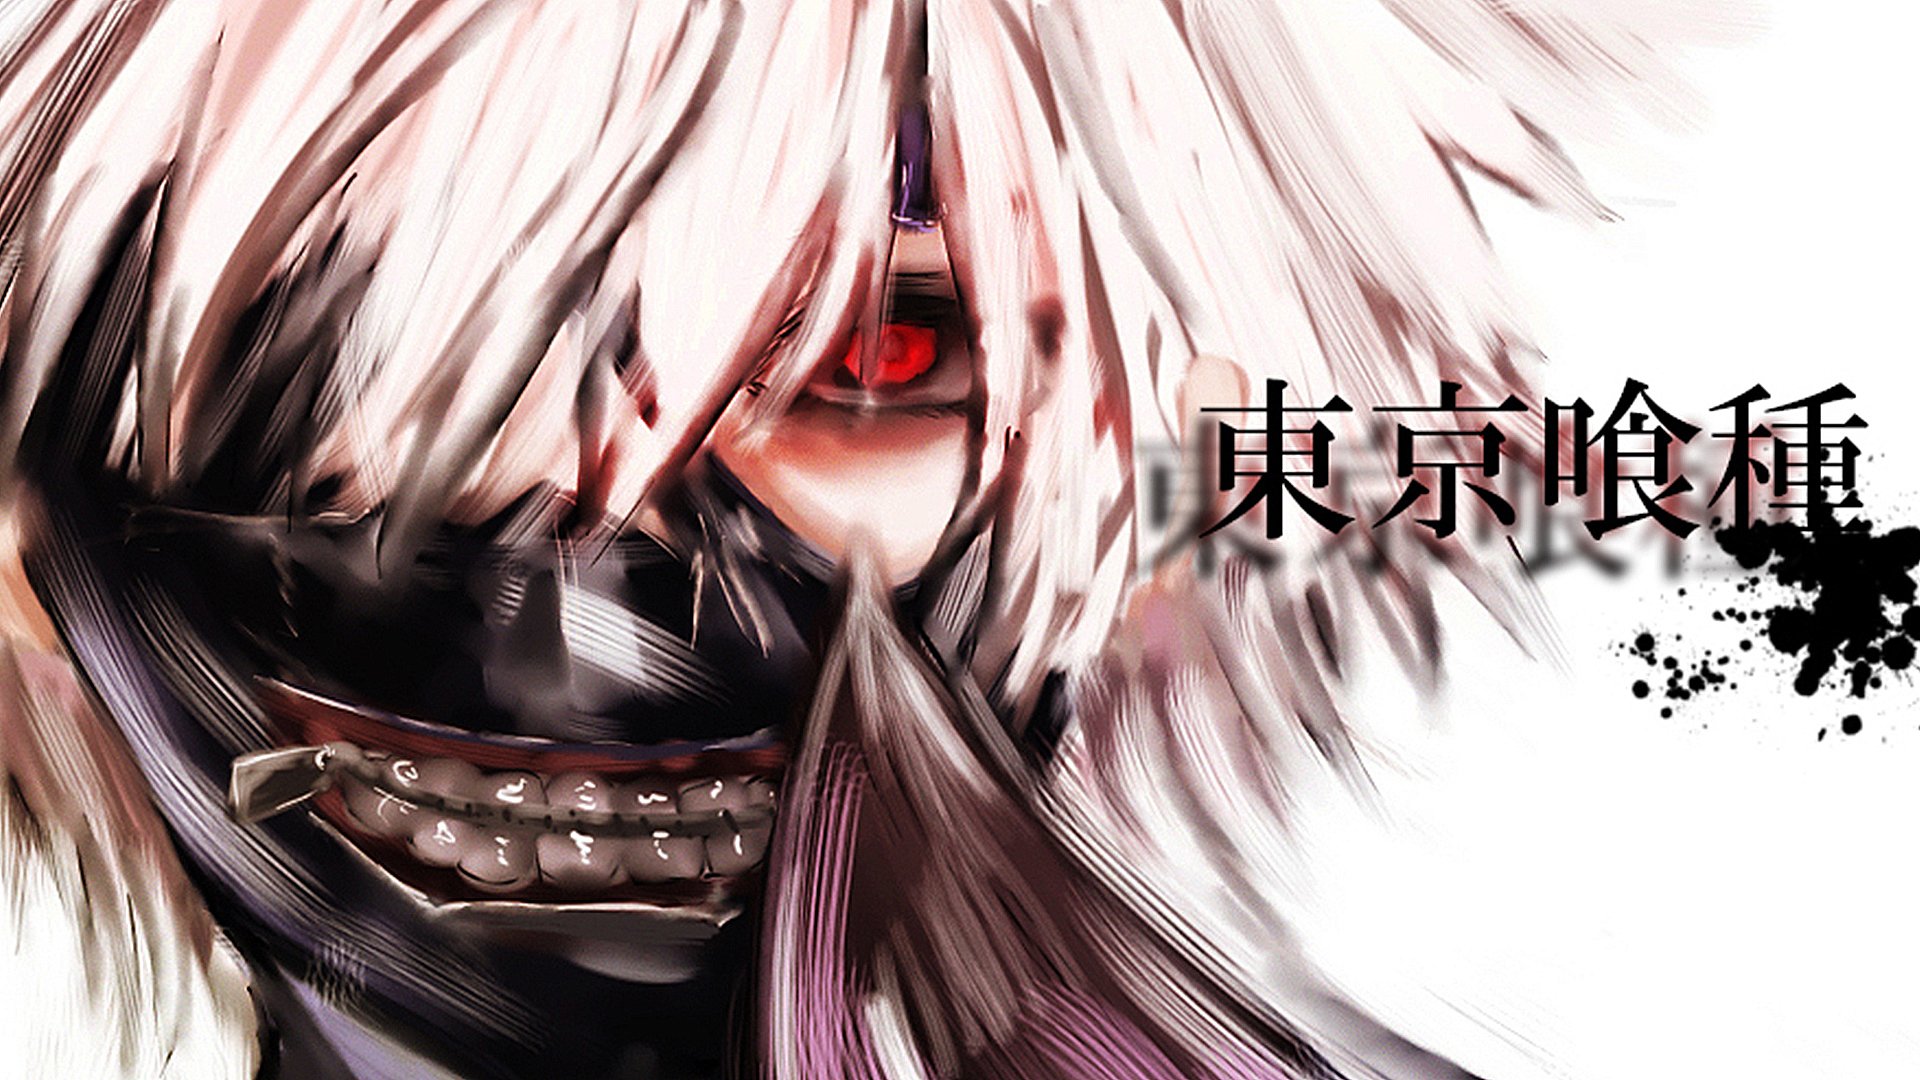  Tokyo  Ghoul  Full HD Wallpaper and Hintergrund 1920x1080 